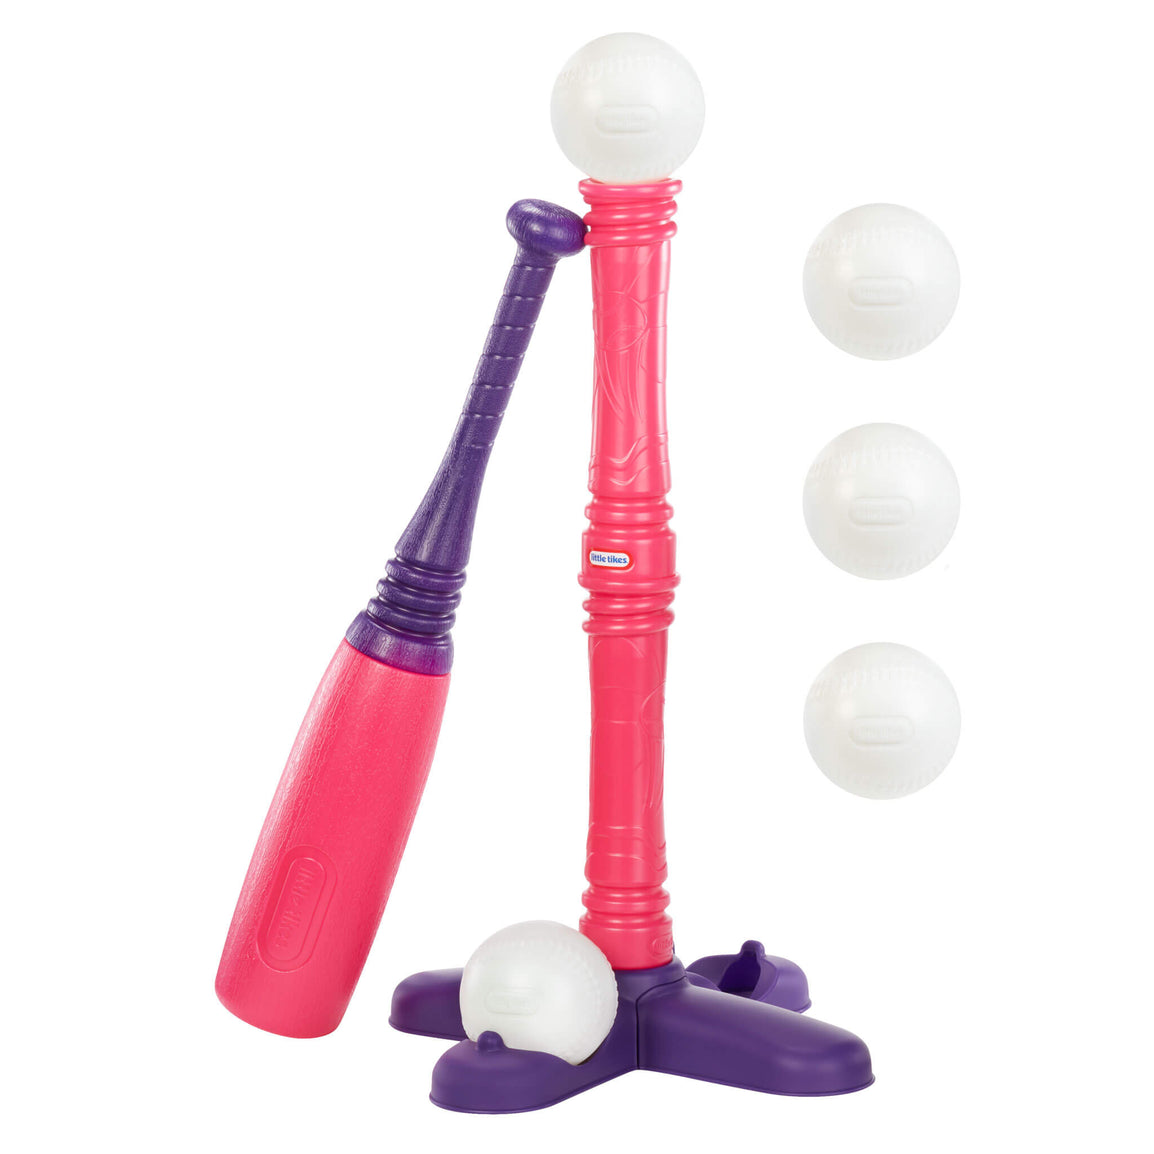 Pink and purple Tball set with 5 balls